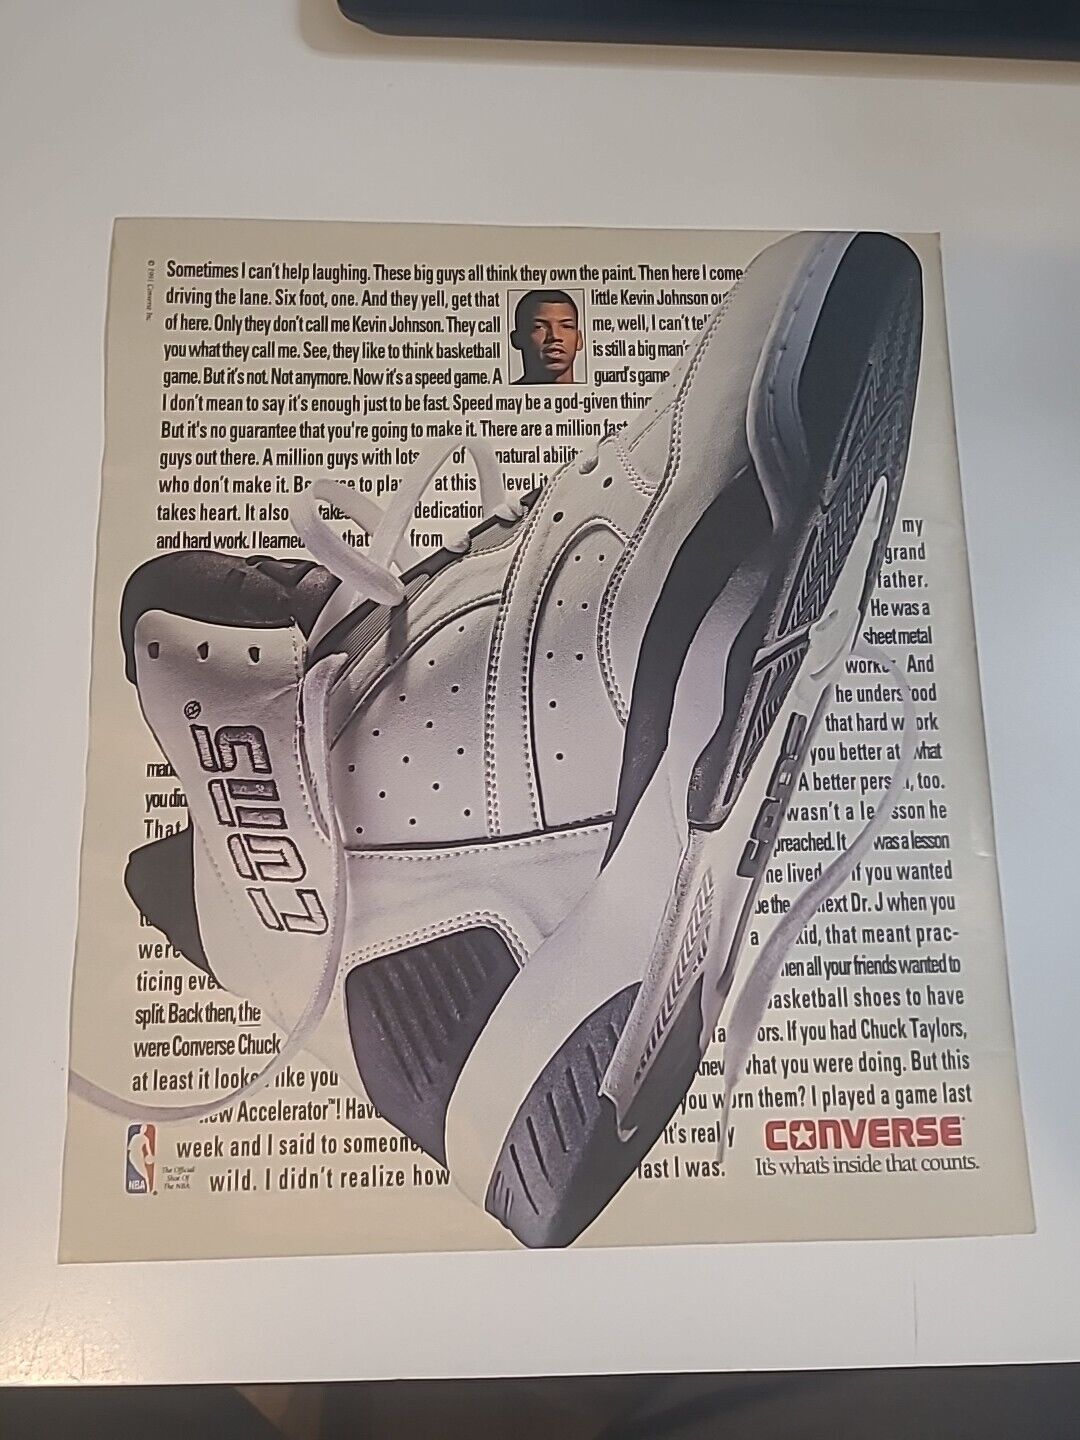 Converse Sneakers Cons Kevin Johnson Vintage 10x12 Print  Ad 1991 